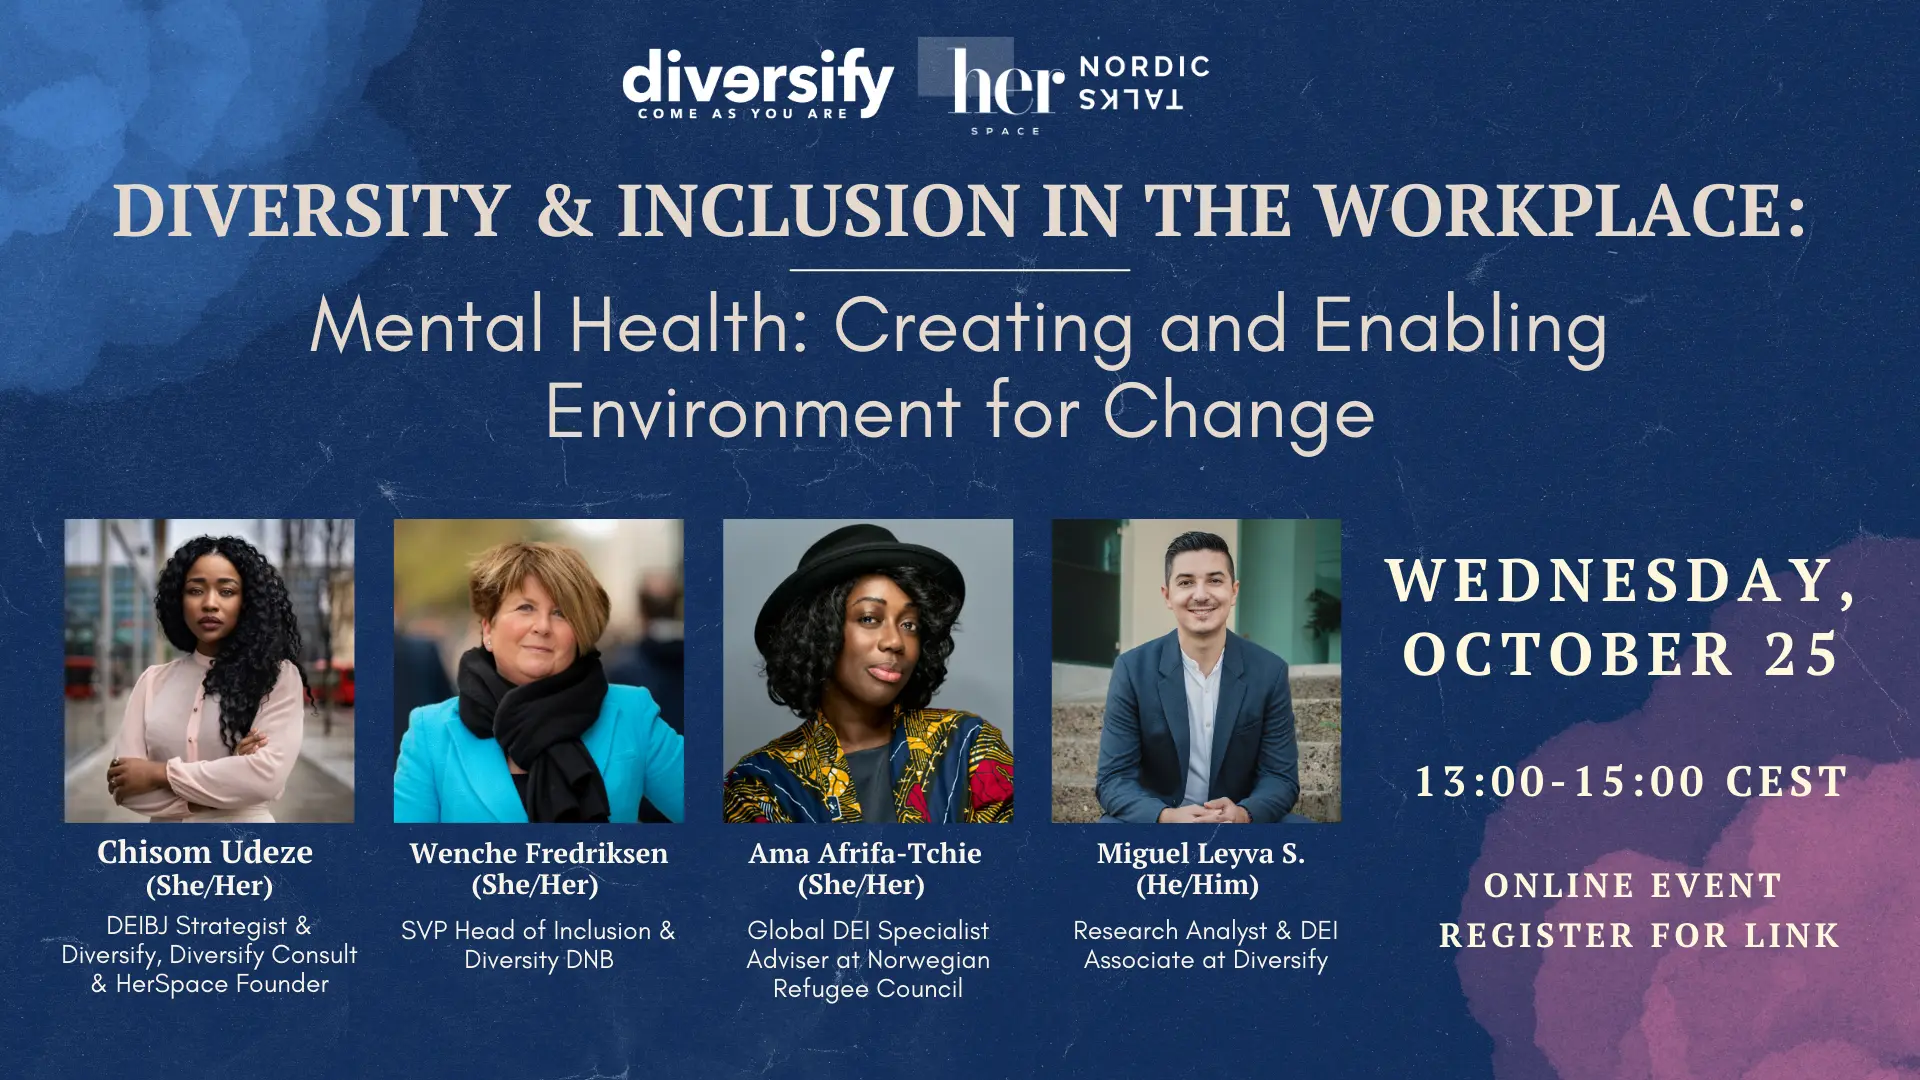 Poster for Diversity & Inclusion in the Workplace with topic for October on Mental Health - Creating and enabling an environment for change